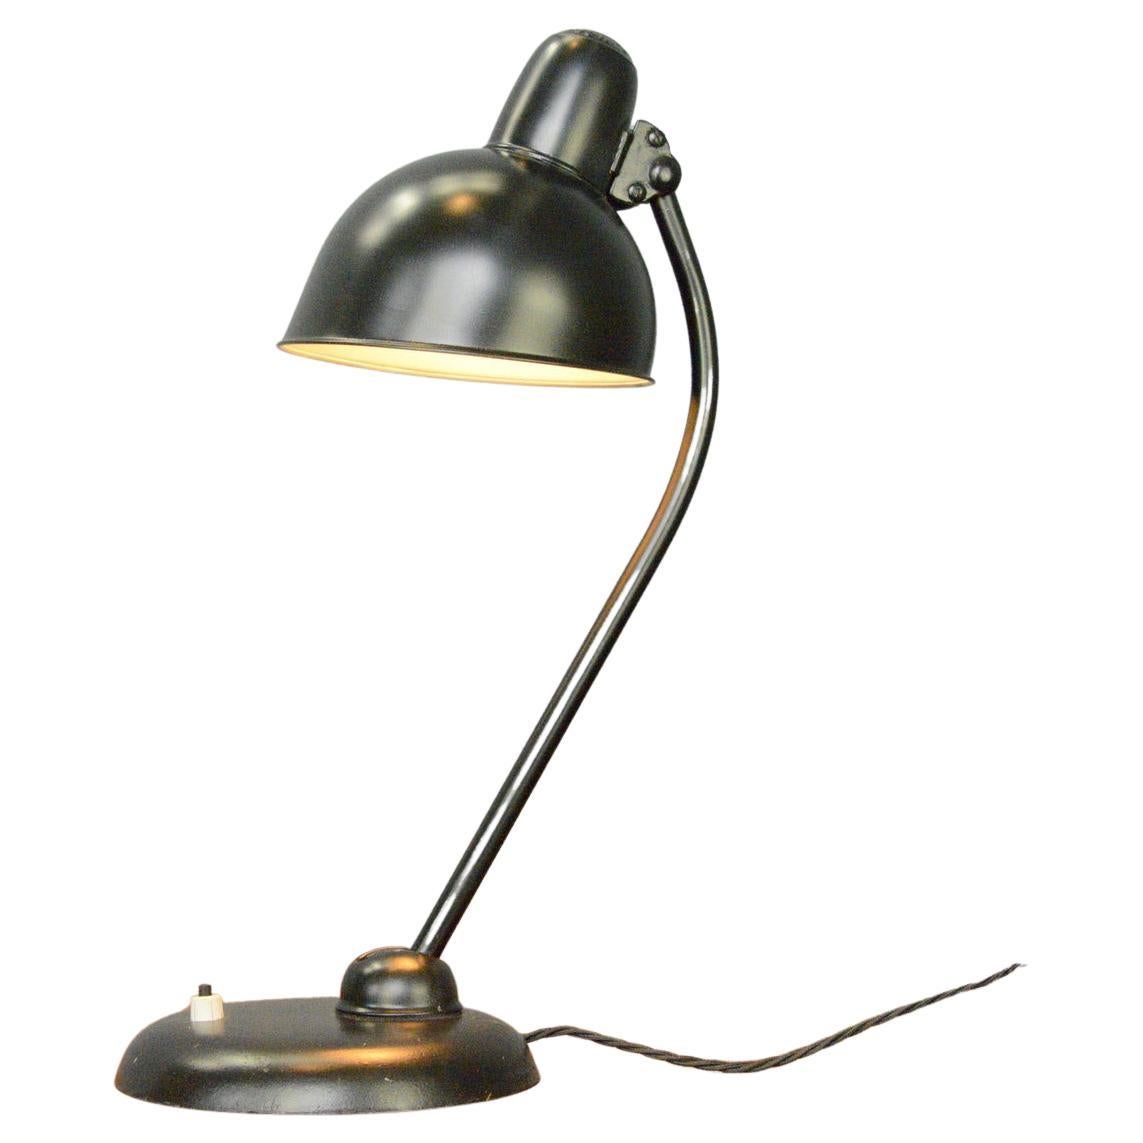 Model 6556 Table Lamp by Kaiser Idell, Circa 1930s